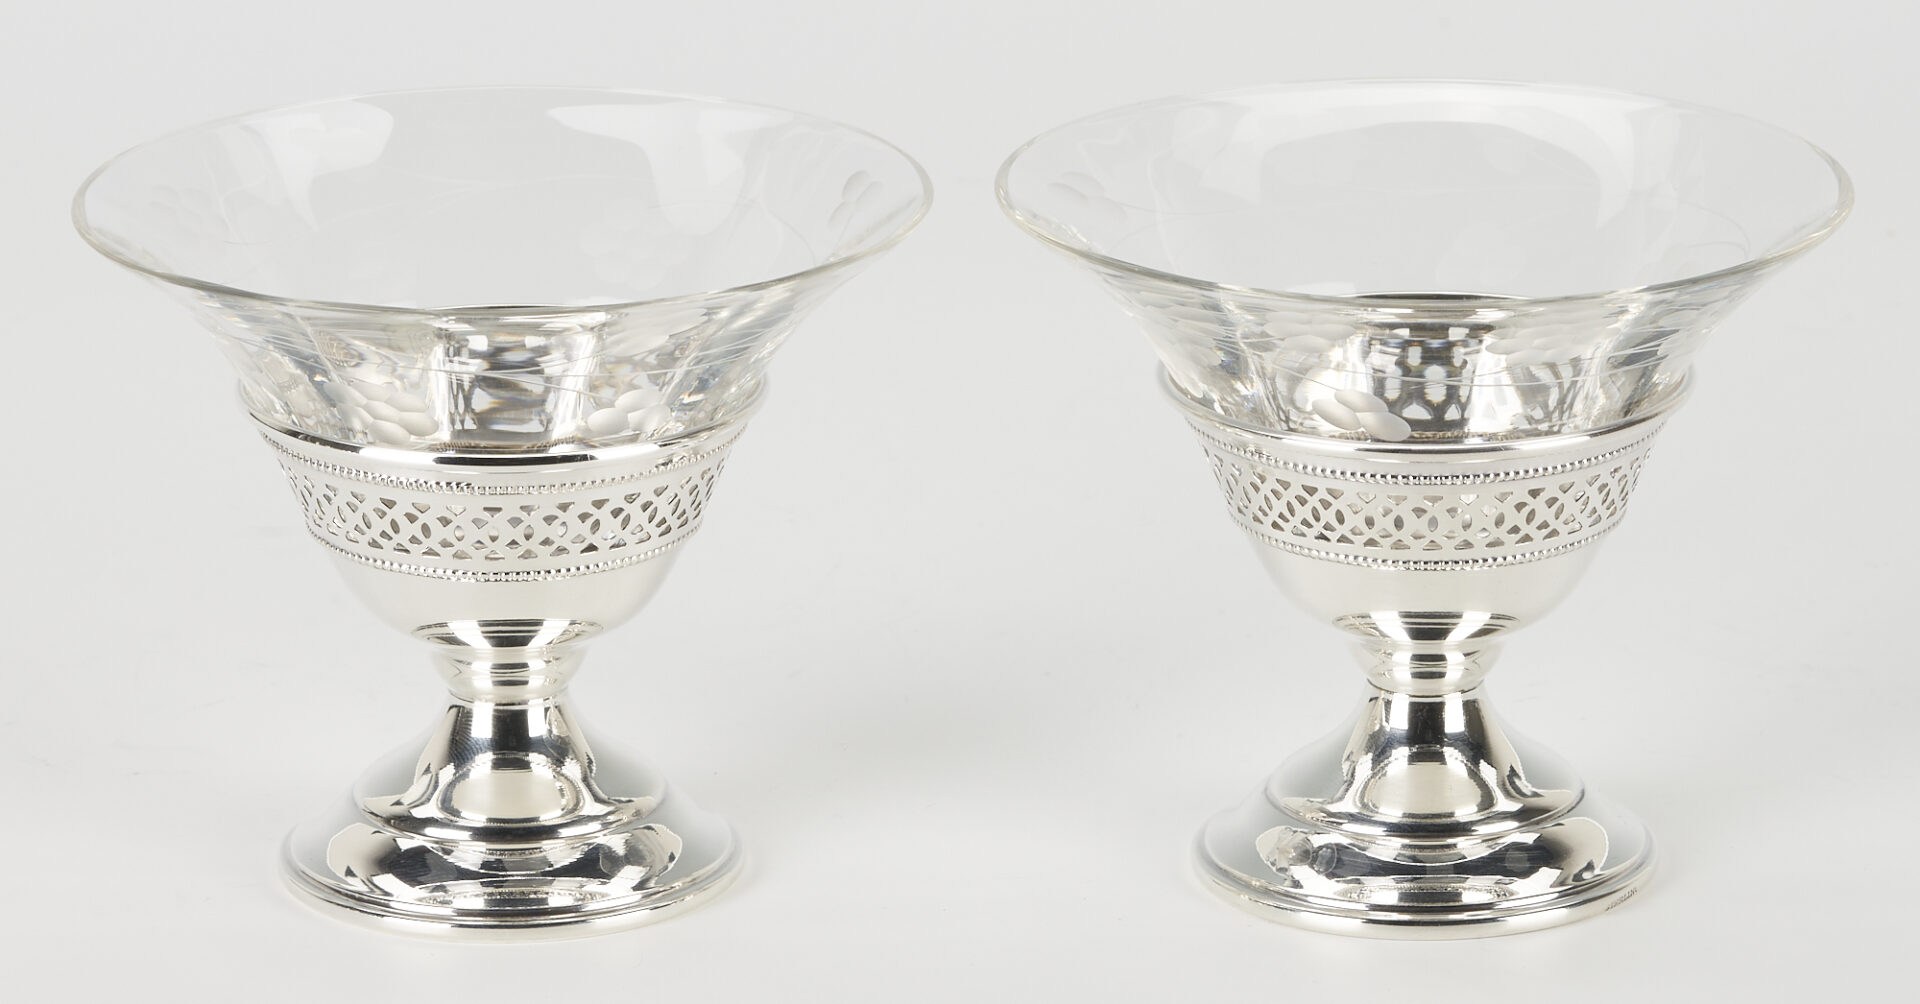 Lot 939: 26 Assembled Sterling Silver Holloware Items, incl. Sherbet Cups